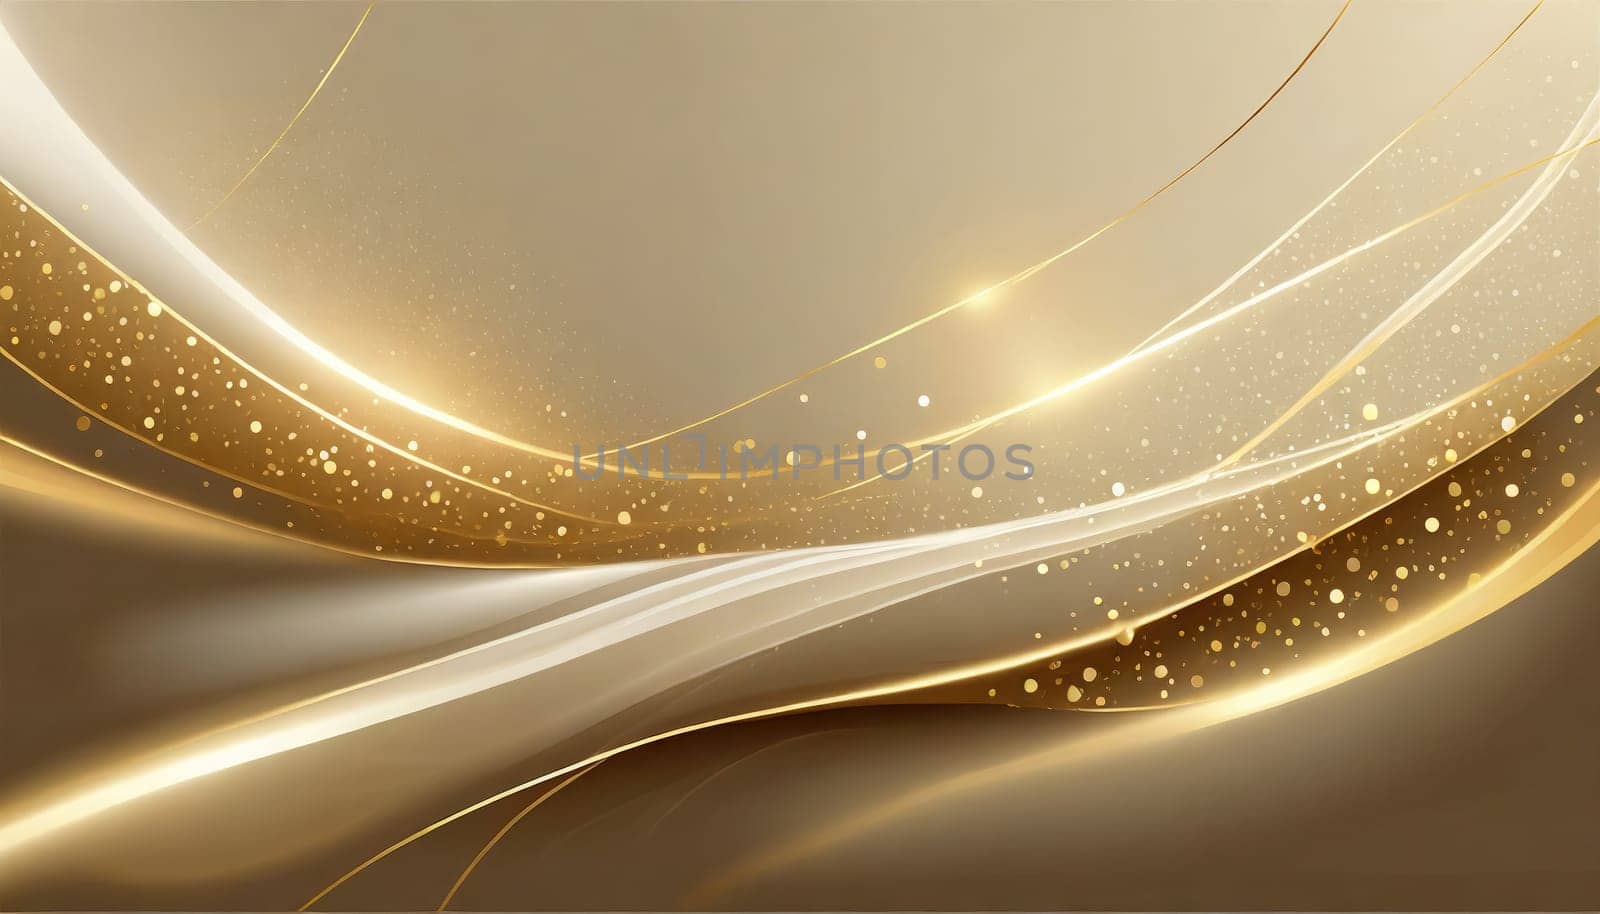 Luxury cream color background with golden line elements and curv by PeaceYAY